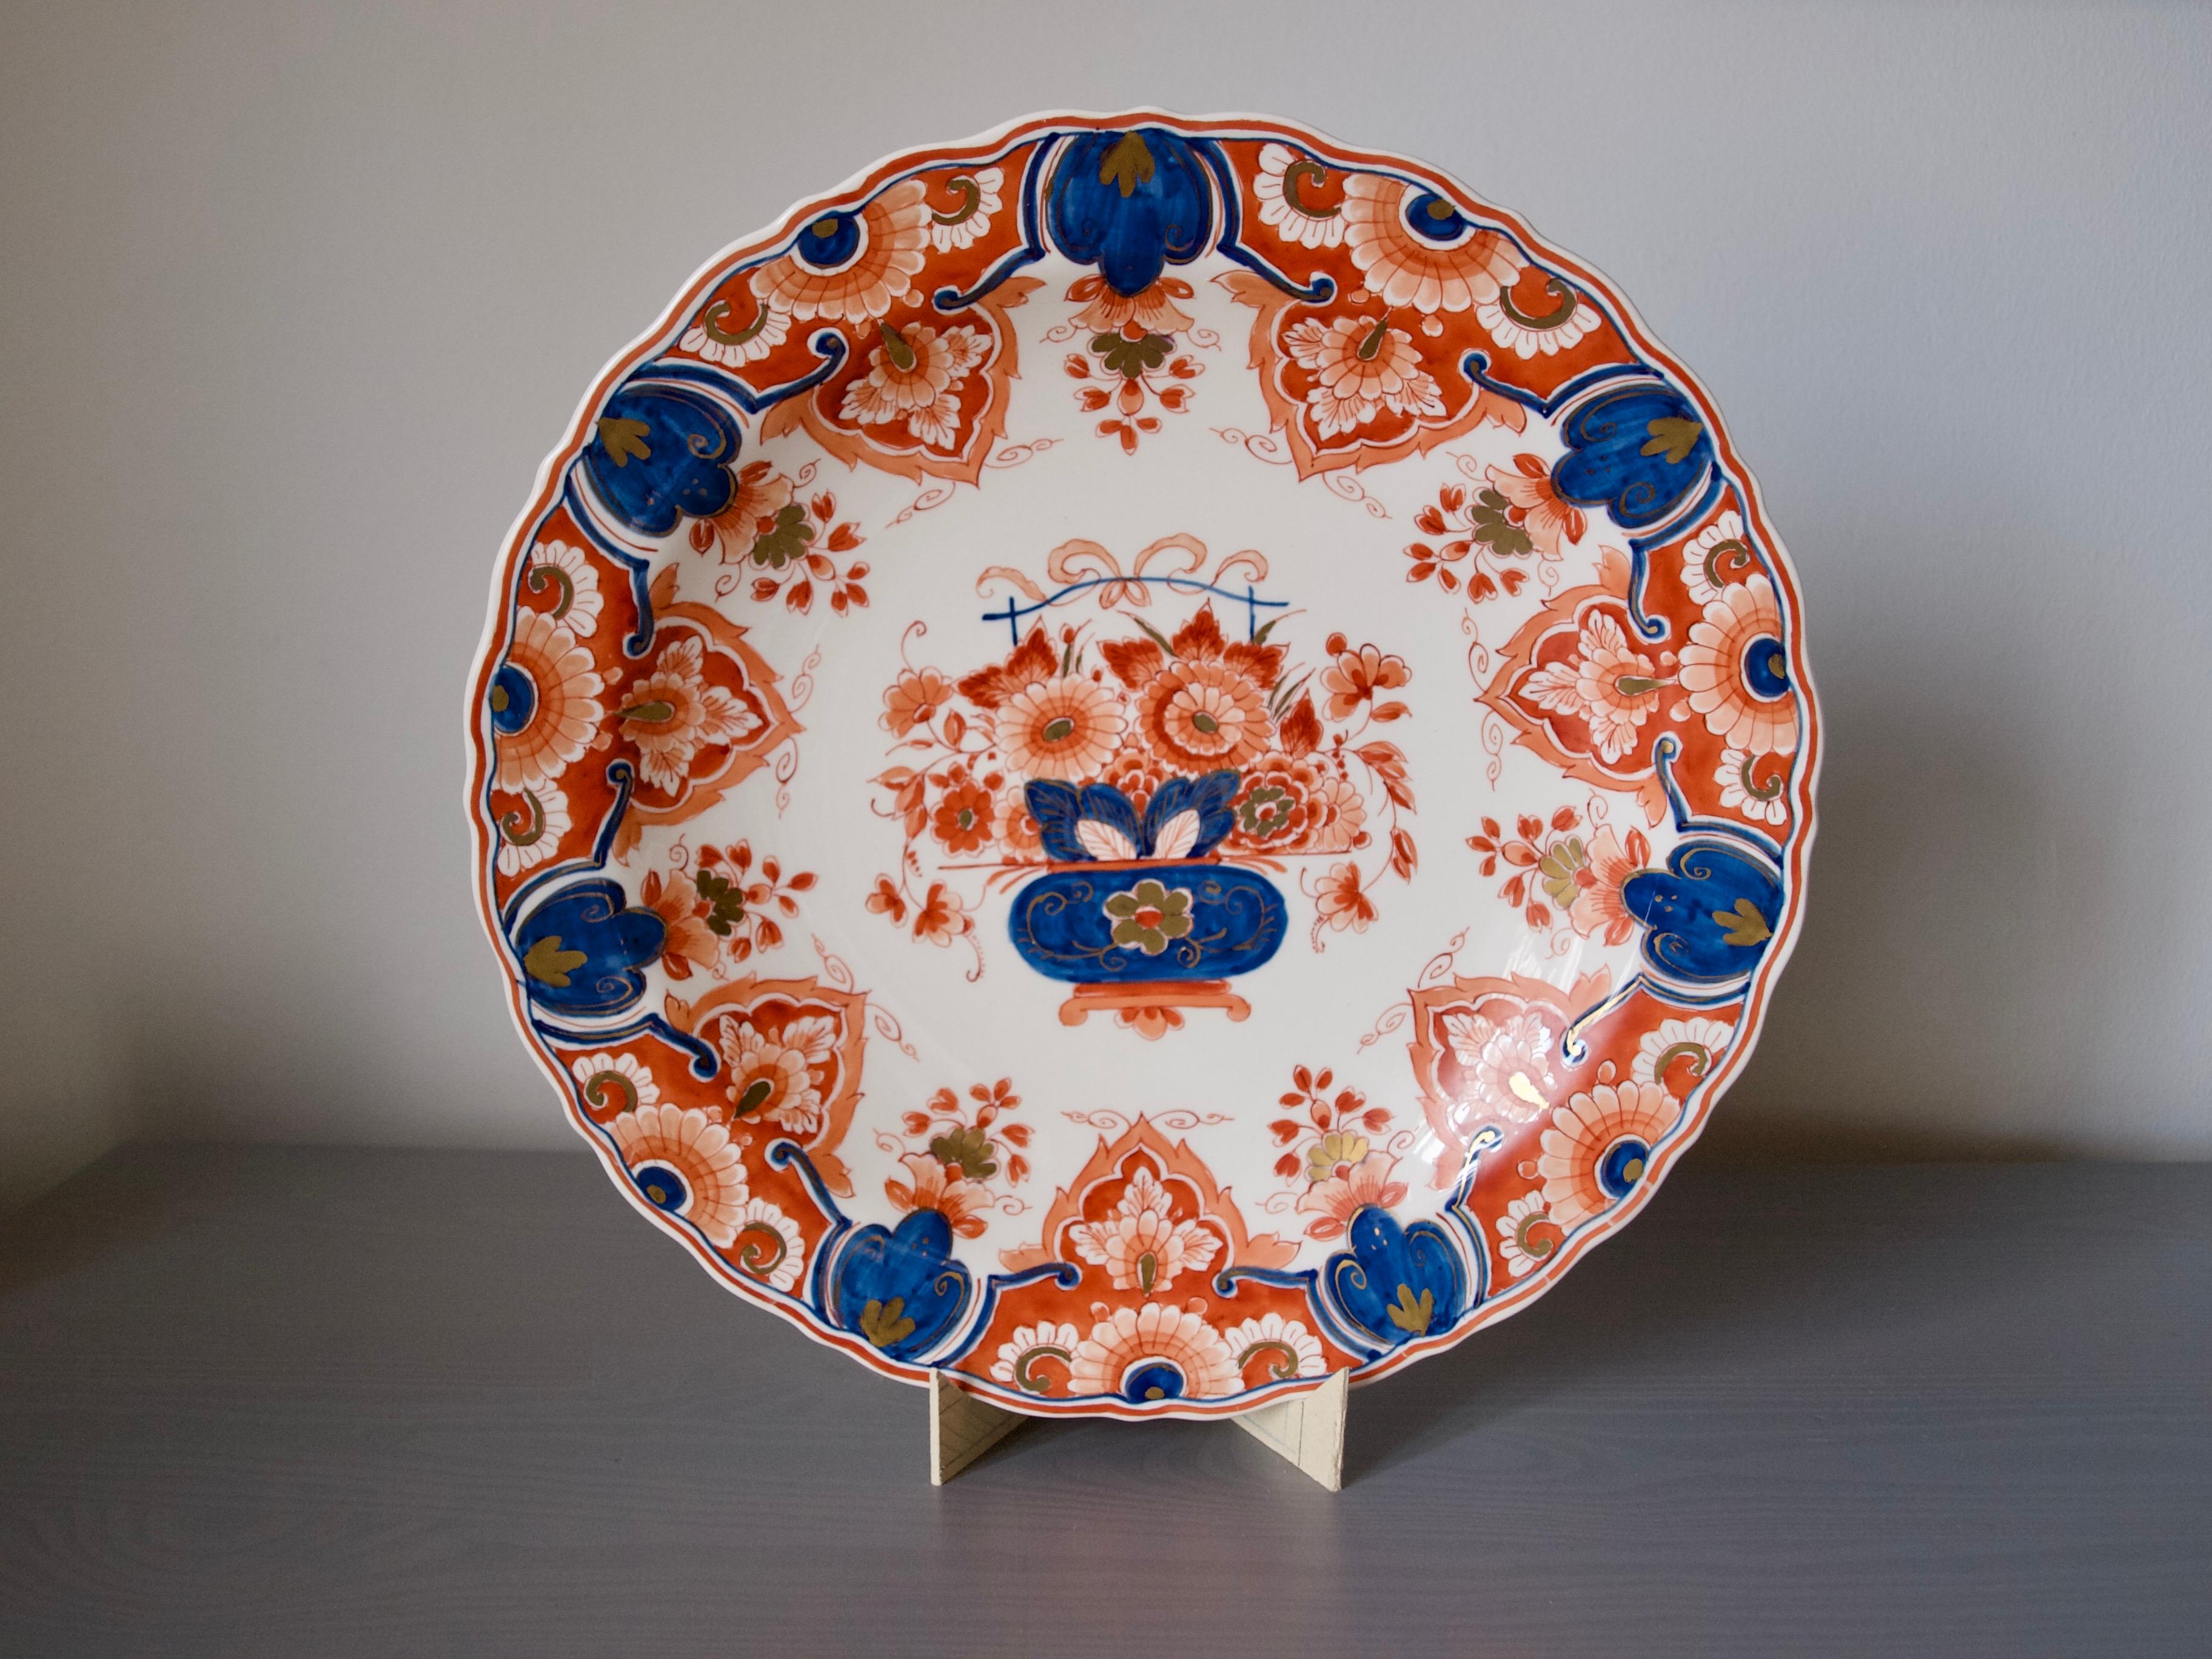 Large handpainted Pijnacker plate by Royal Delft
Pijnacker decoration, inspired by Japanese Imari style, 
with red/orange, blue and true gold painting. 

Pijnacker is the most expensive technique.

Measures: diameter 30 cm 
Height 4 cm